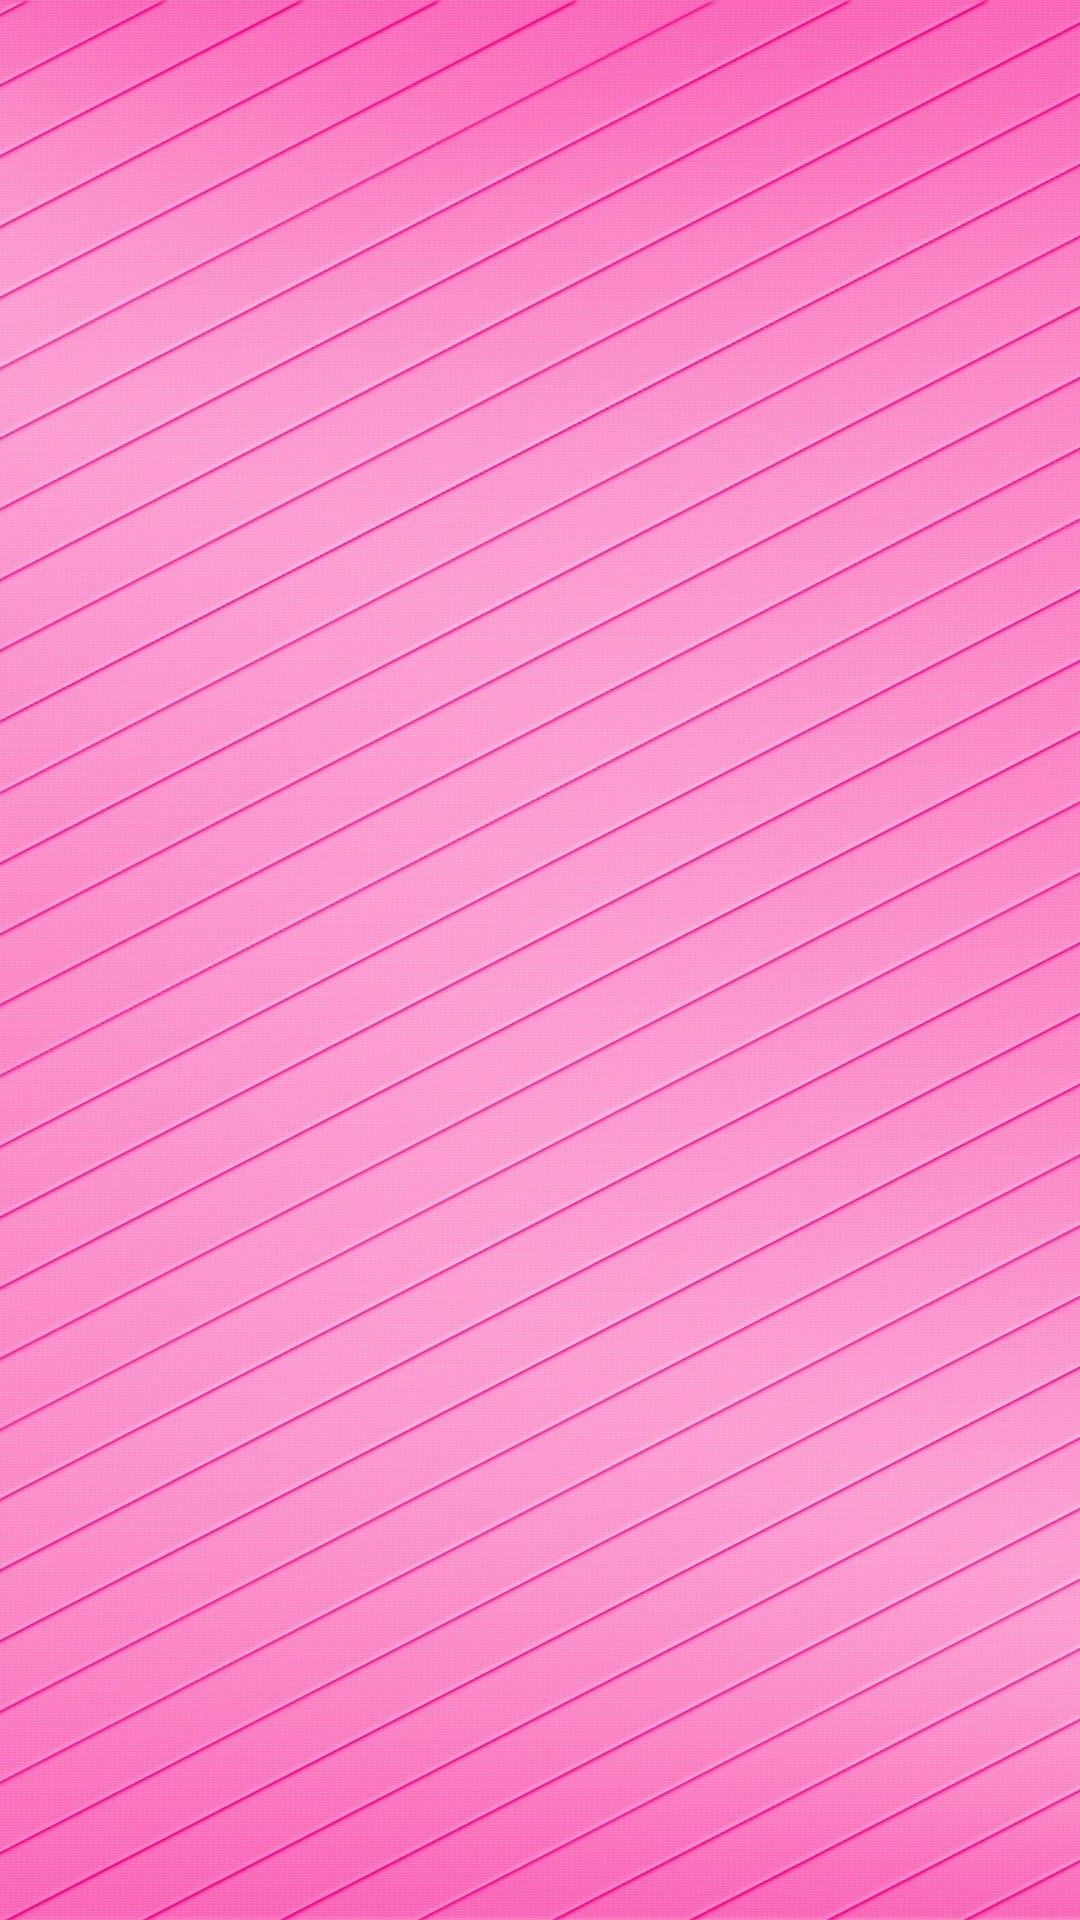 Pink Wallpaper For Android Mobile .3Dandroidwallpaper.com